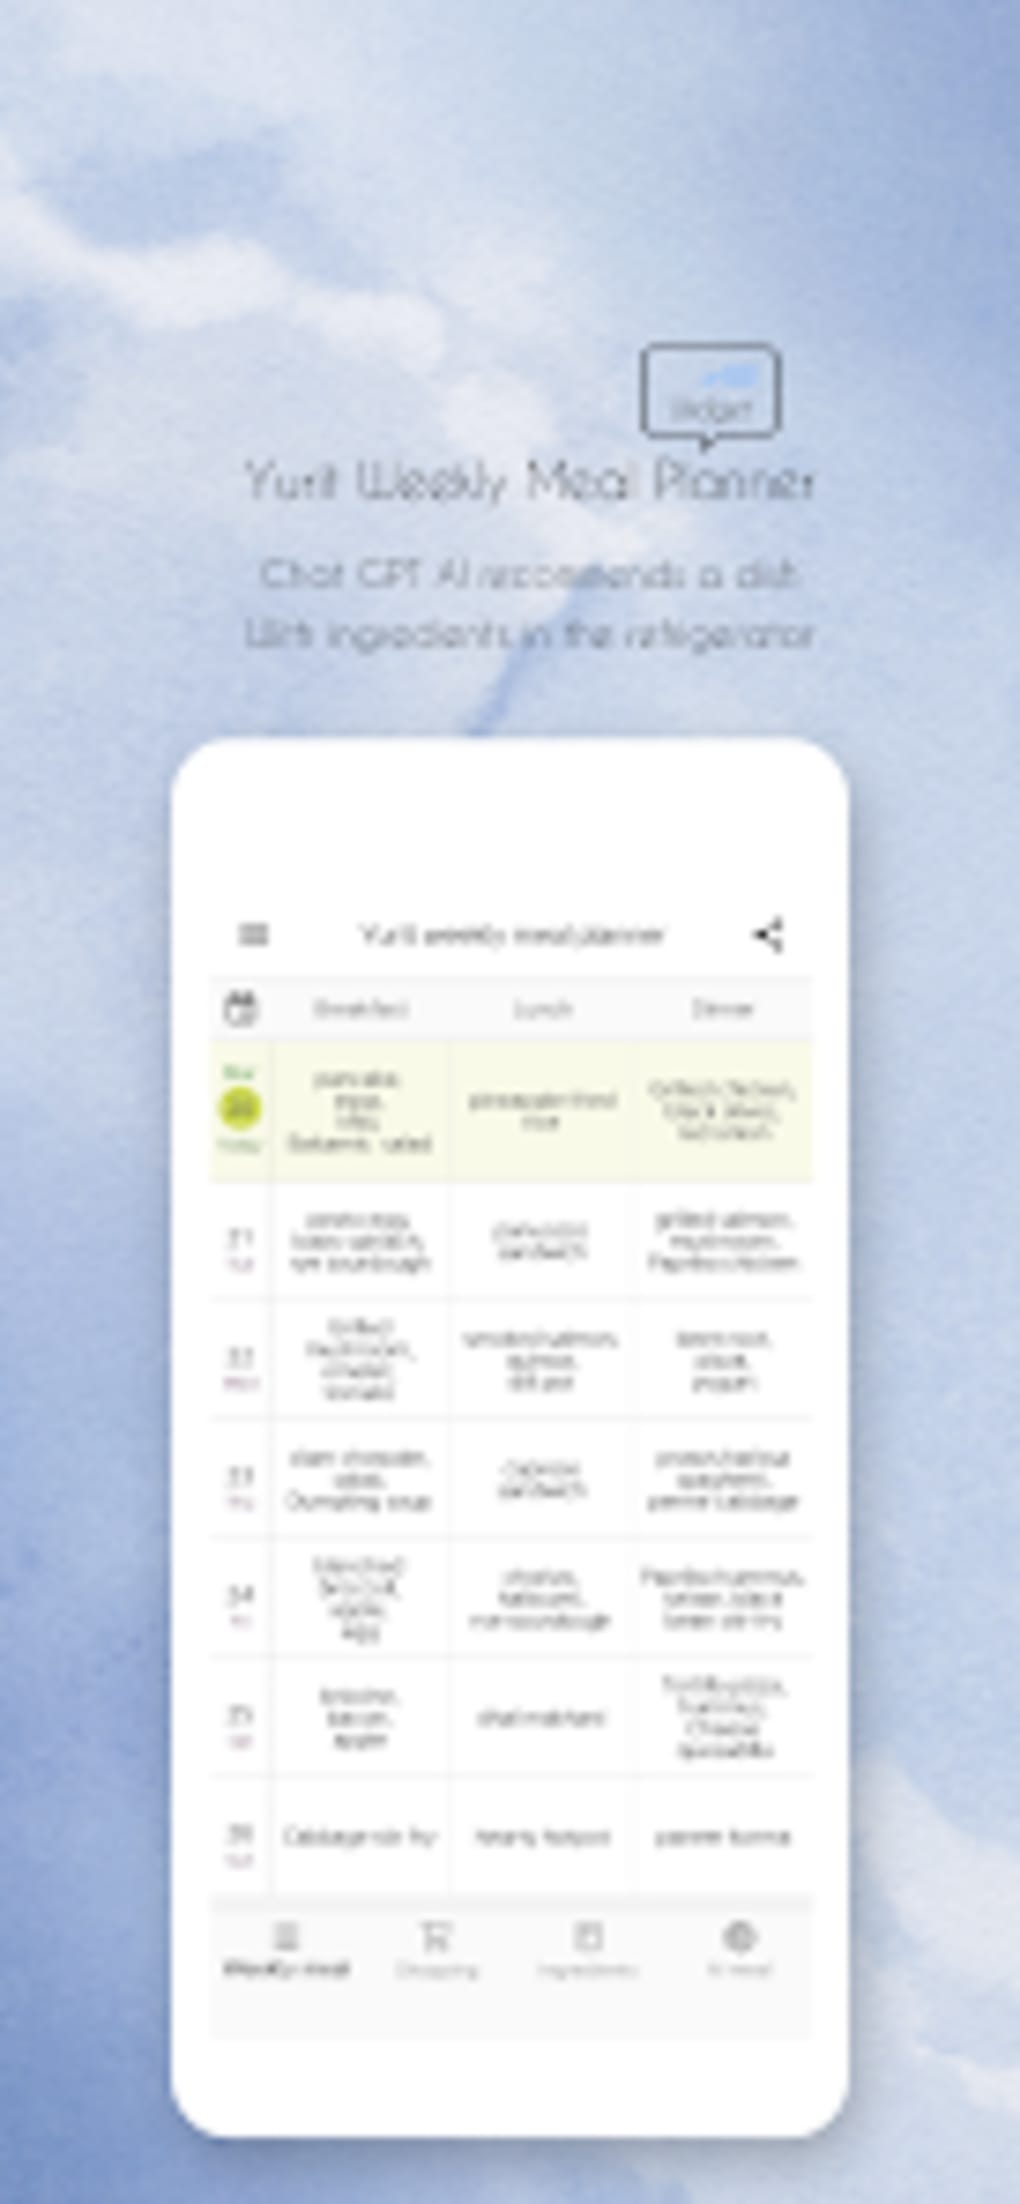 yurit-weekly-meal-planner-android